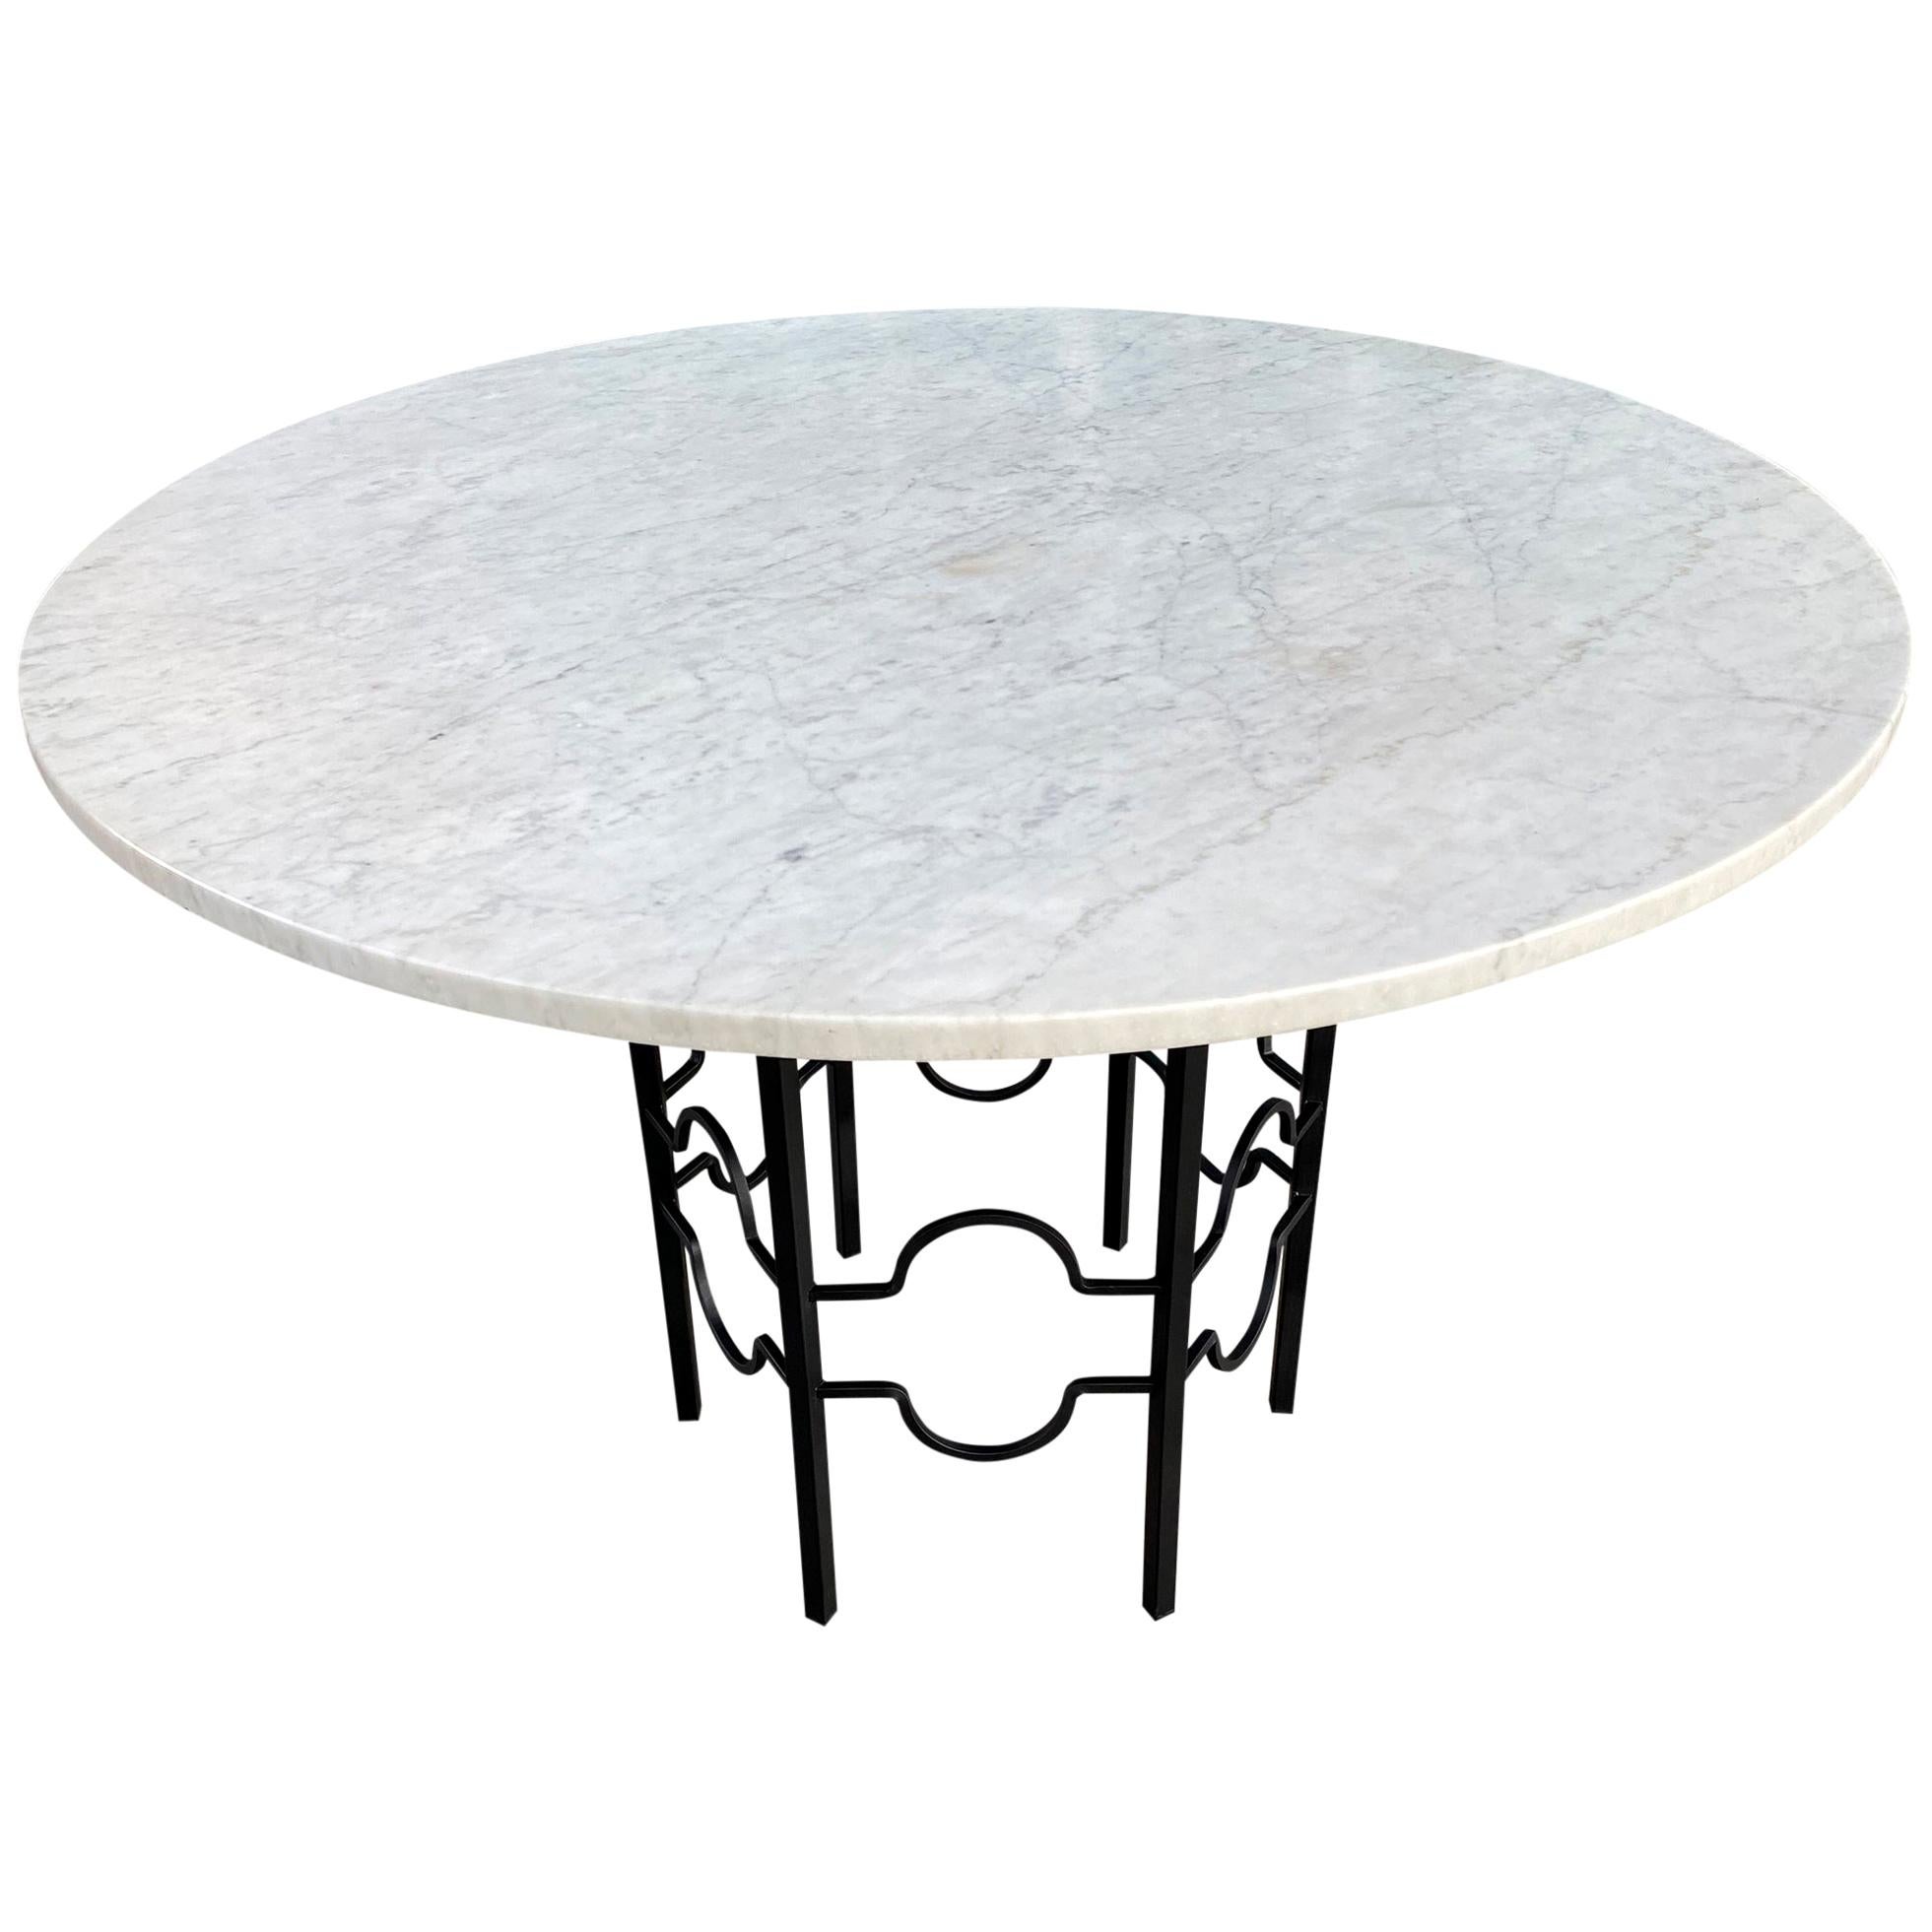 Midcentury Round Carrara Marble-Top Patio Dining Table with Hexagon Iron Base